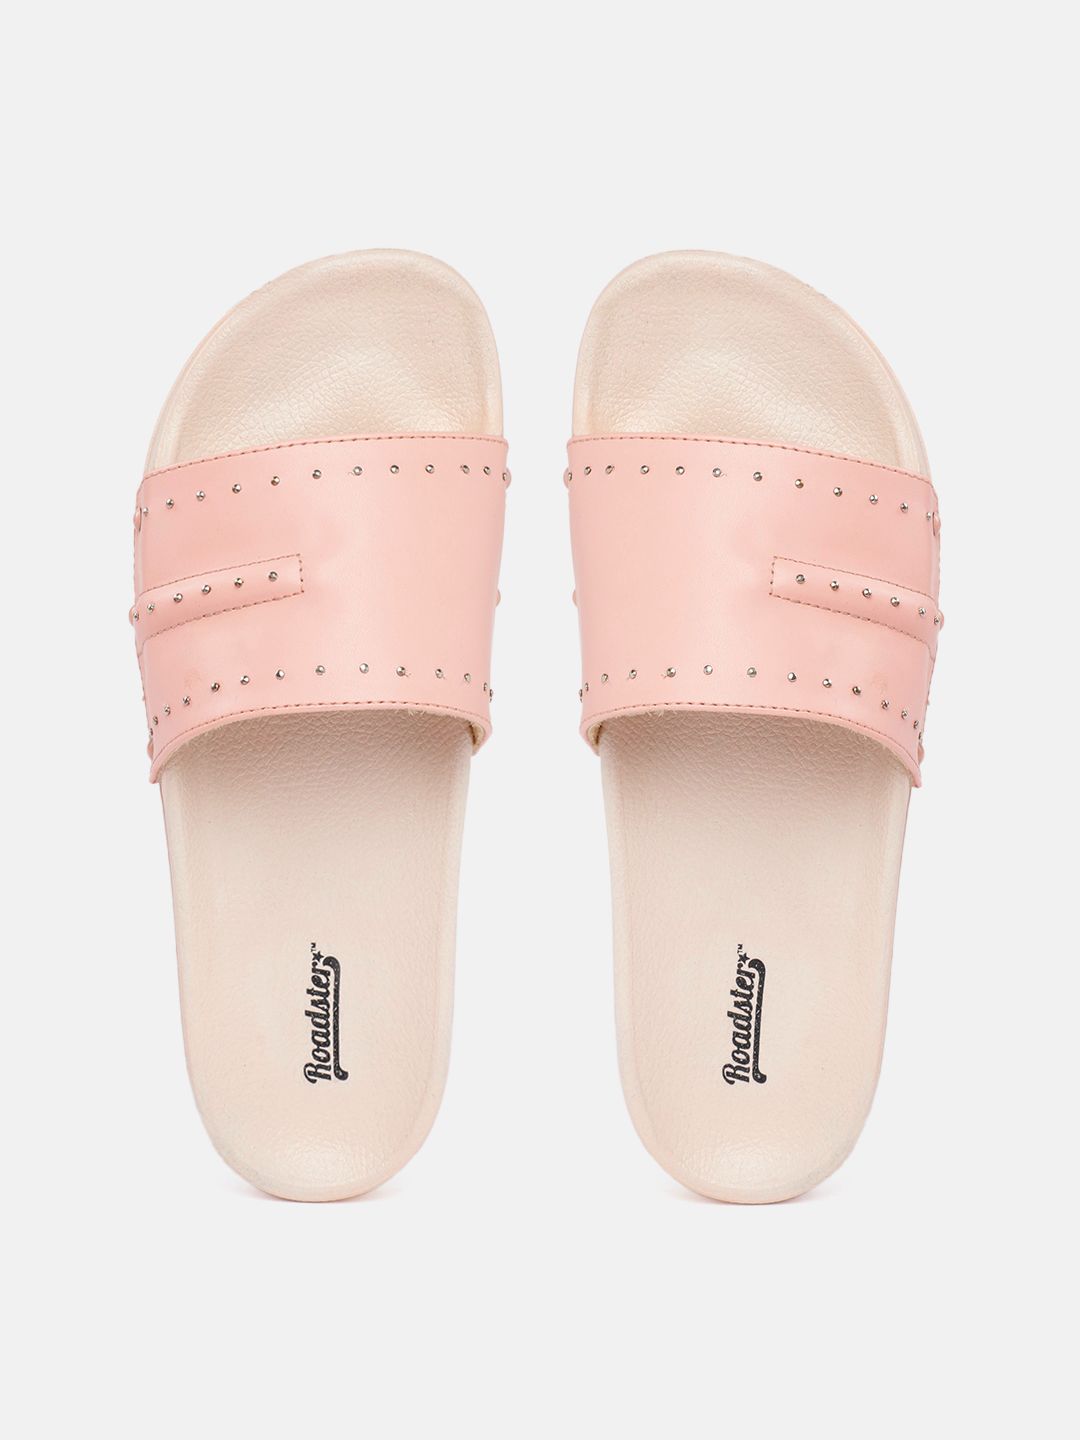 Roadster Women Pink Embellished Sliders Price in India